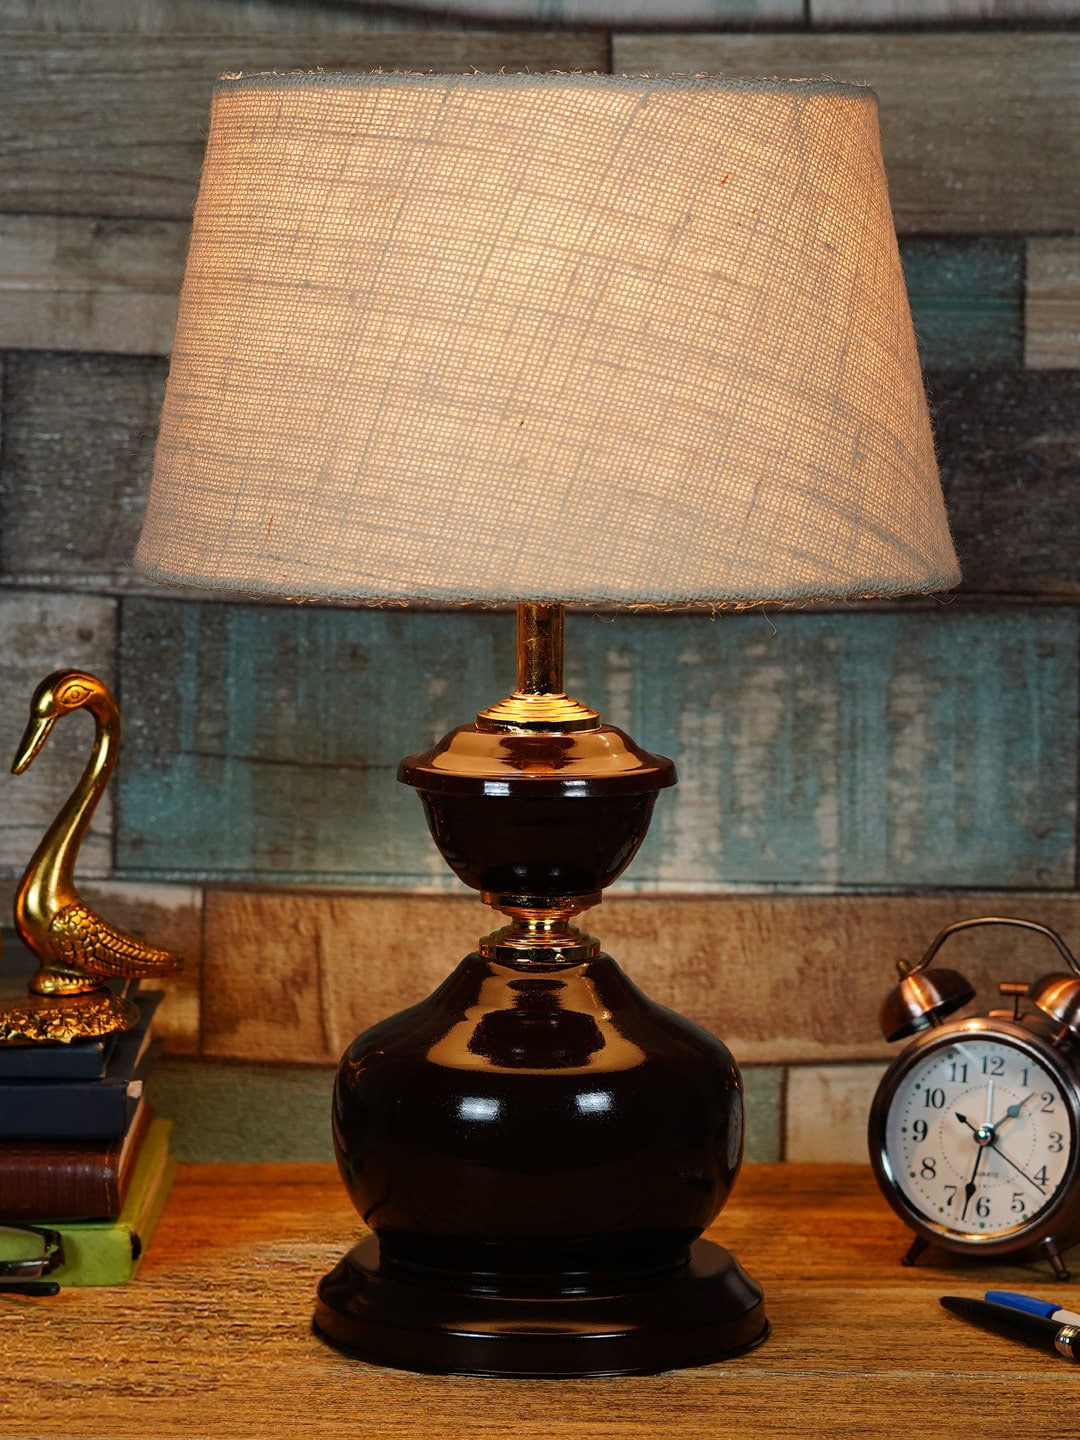 foziq Brown & Beige Textured Table Lamps With Shade Price in India